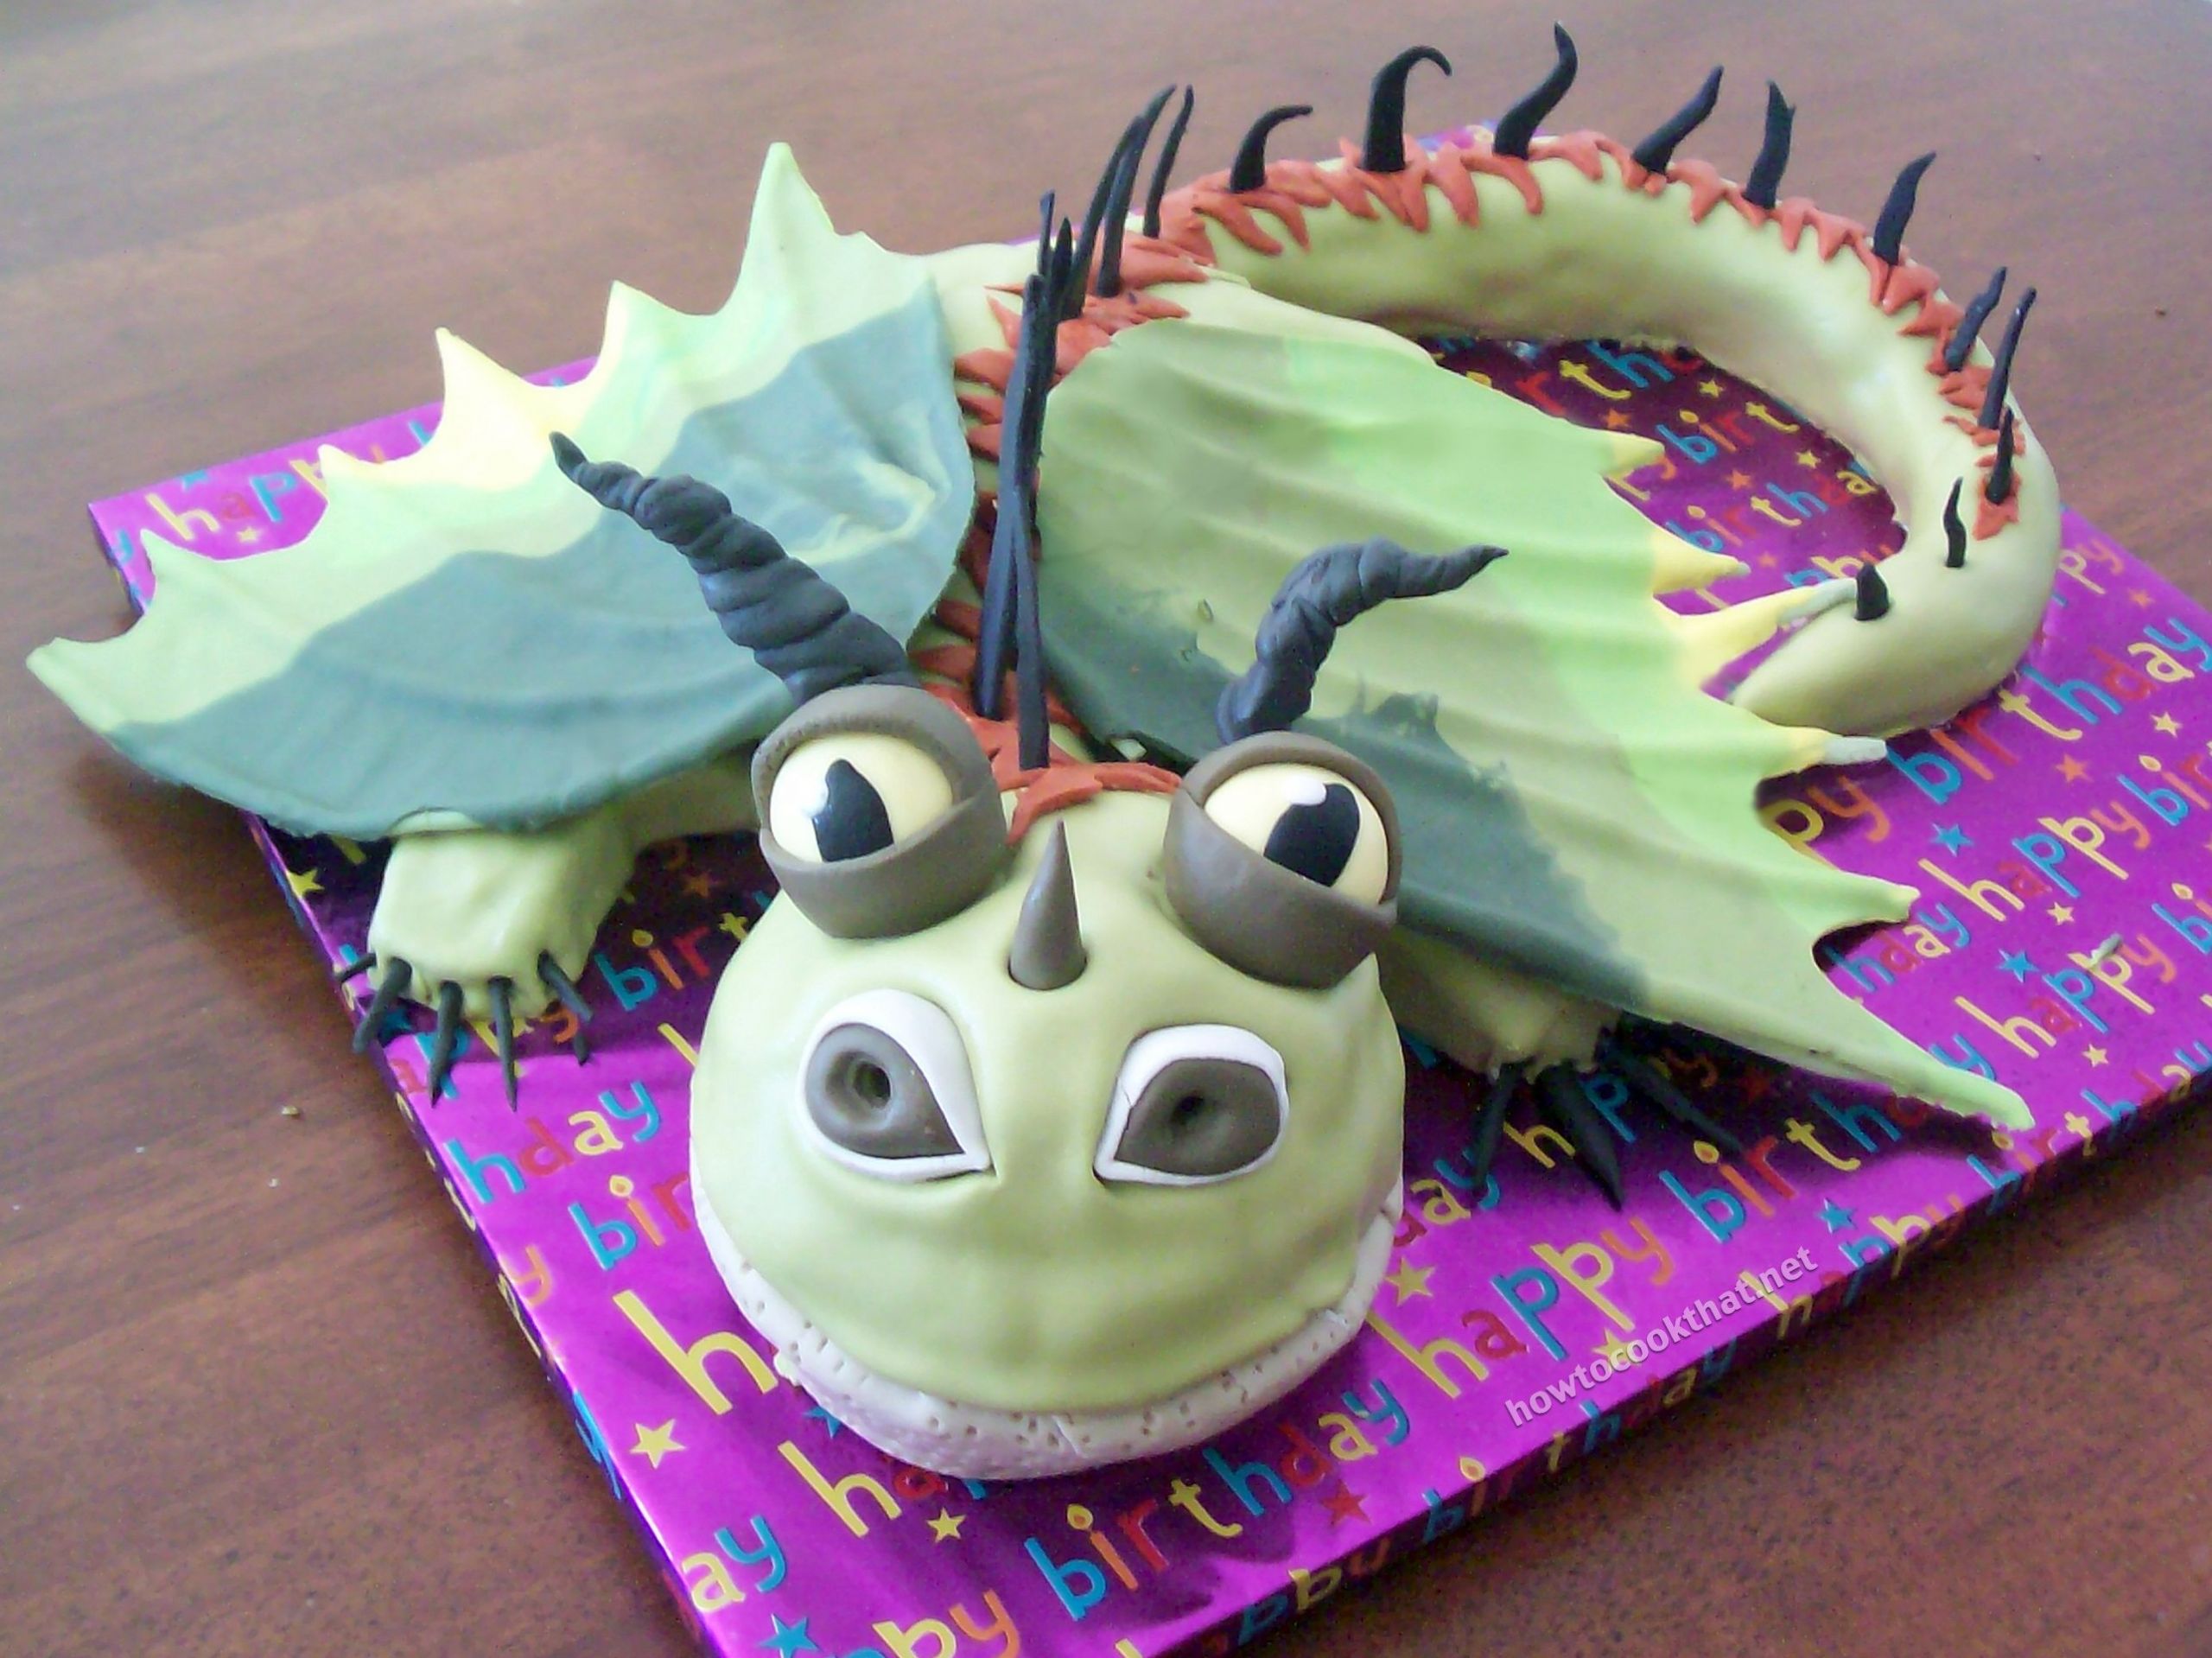 How To Train Your Dragon Birthday Cake
 HowToCookThat Cakes Dessert & Chocolate